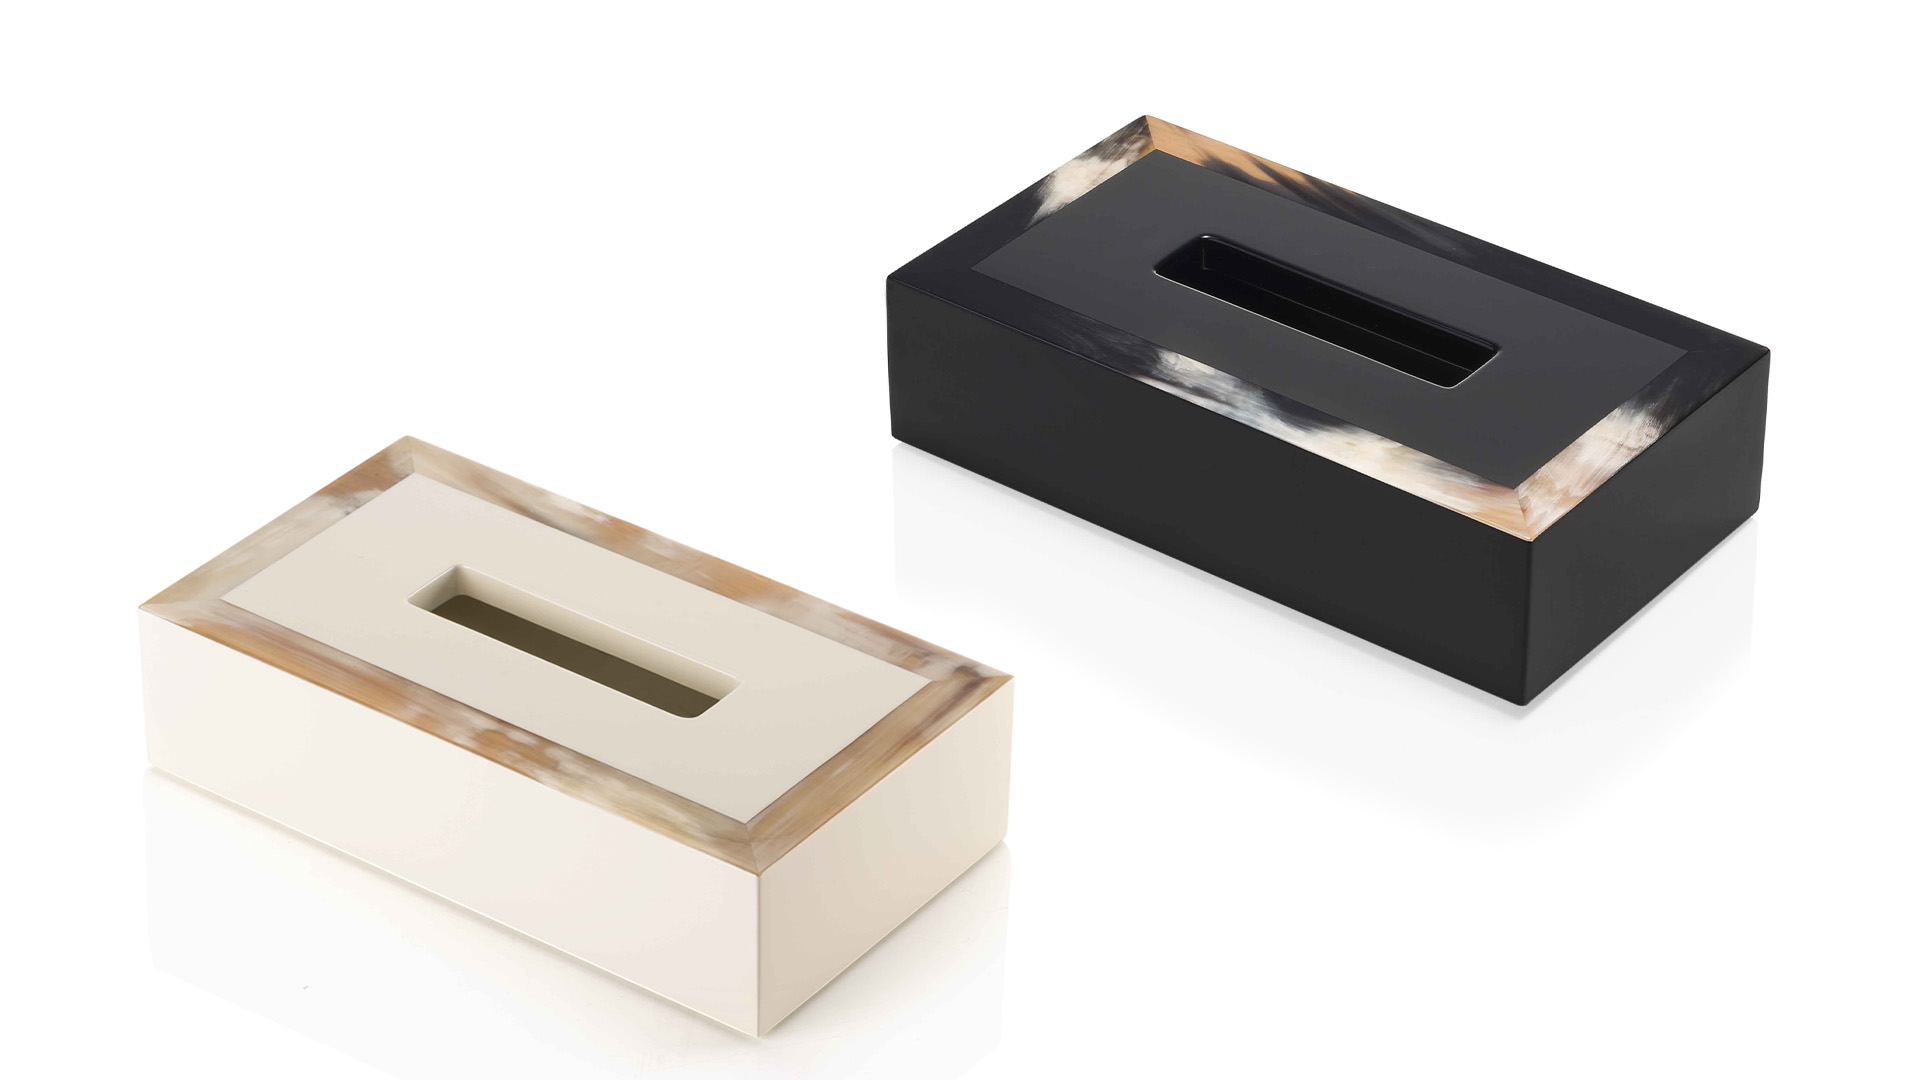 Office sets and smoking accessories - Geremia tissue box holder in horn and glossy ivory or black lacquered wood - cover - Arcahorn